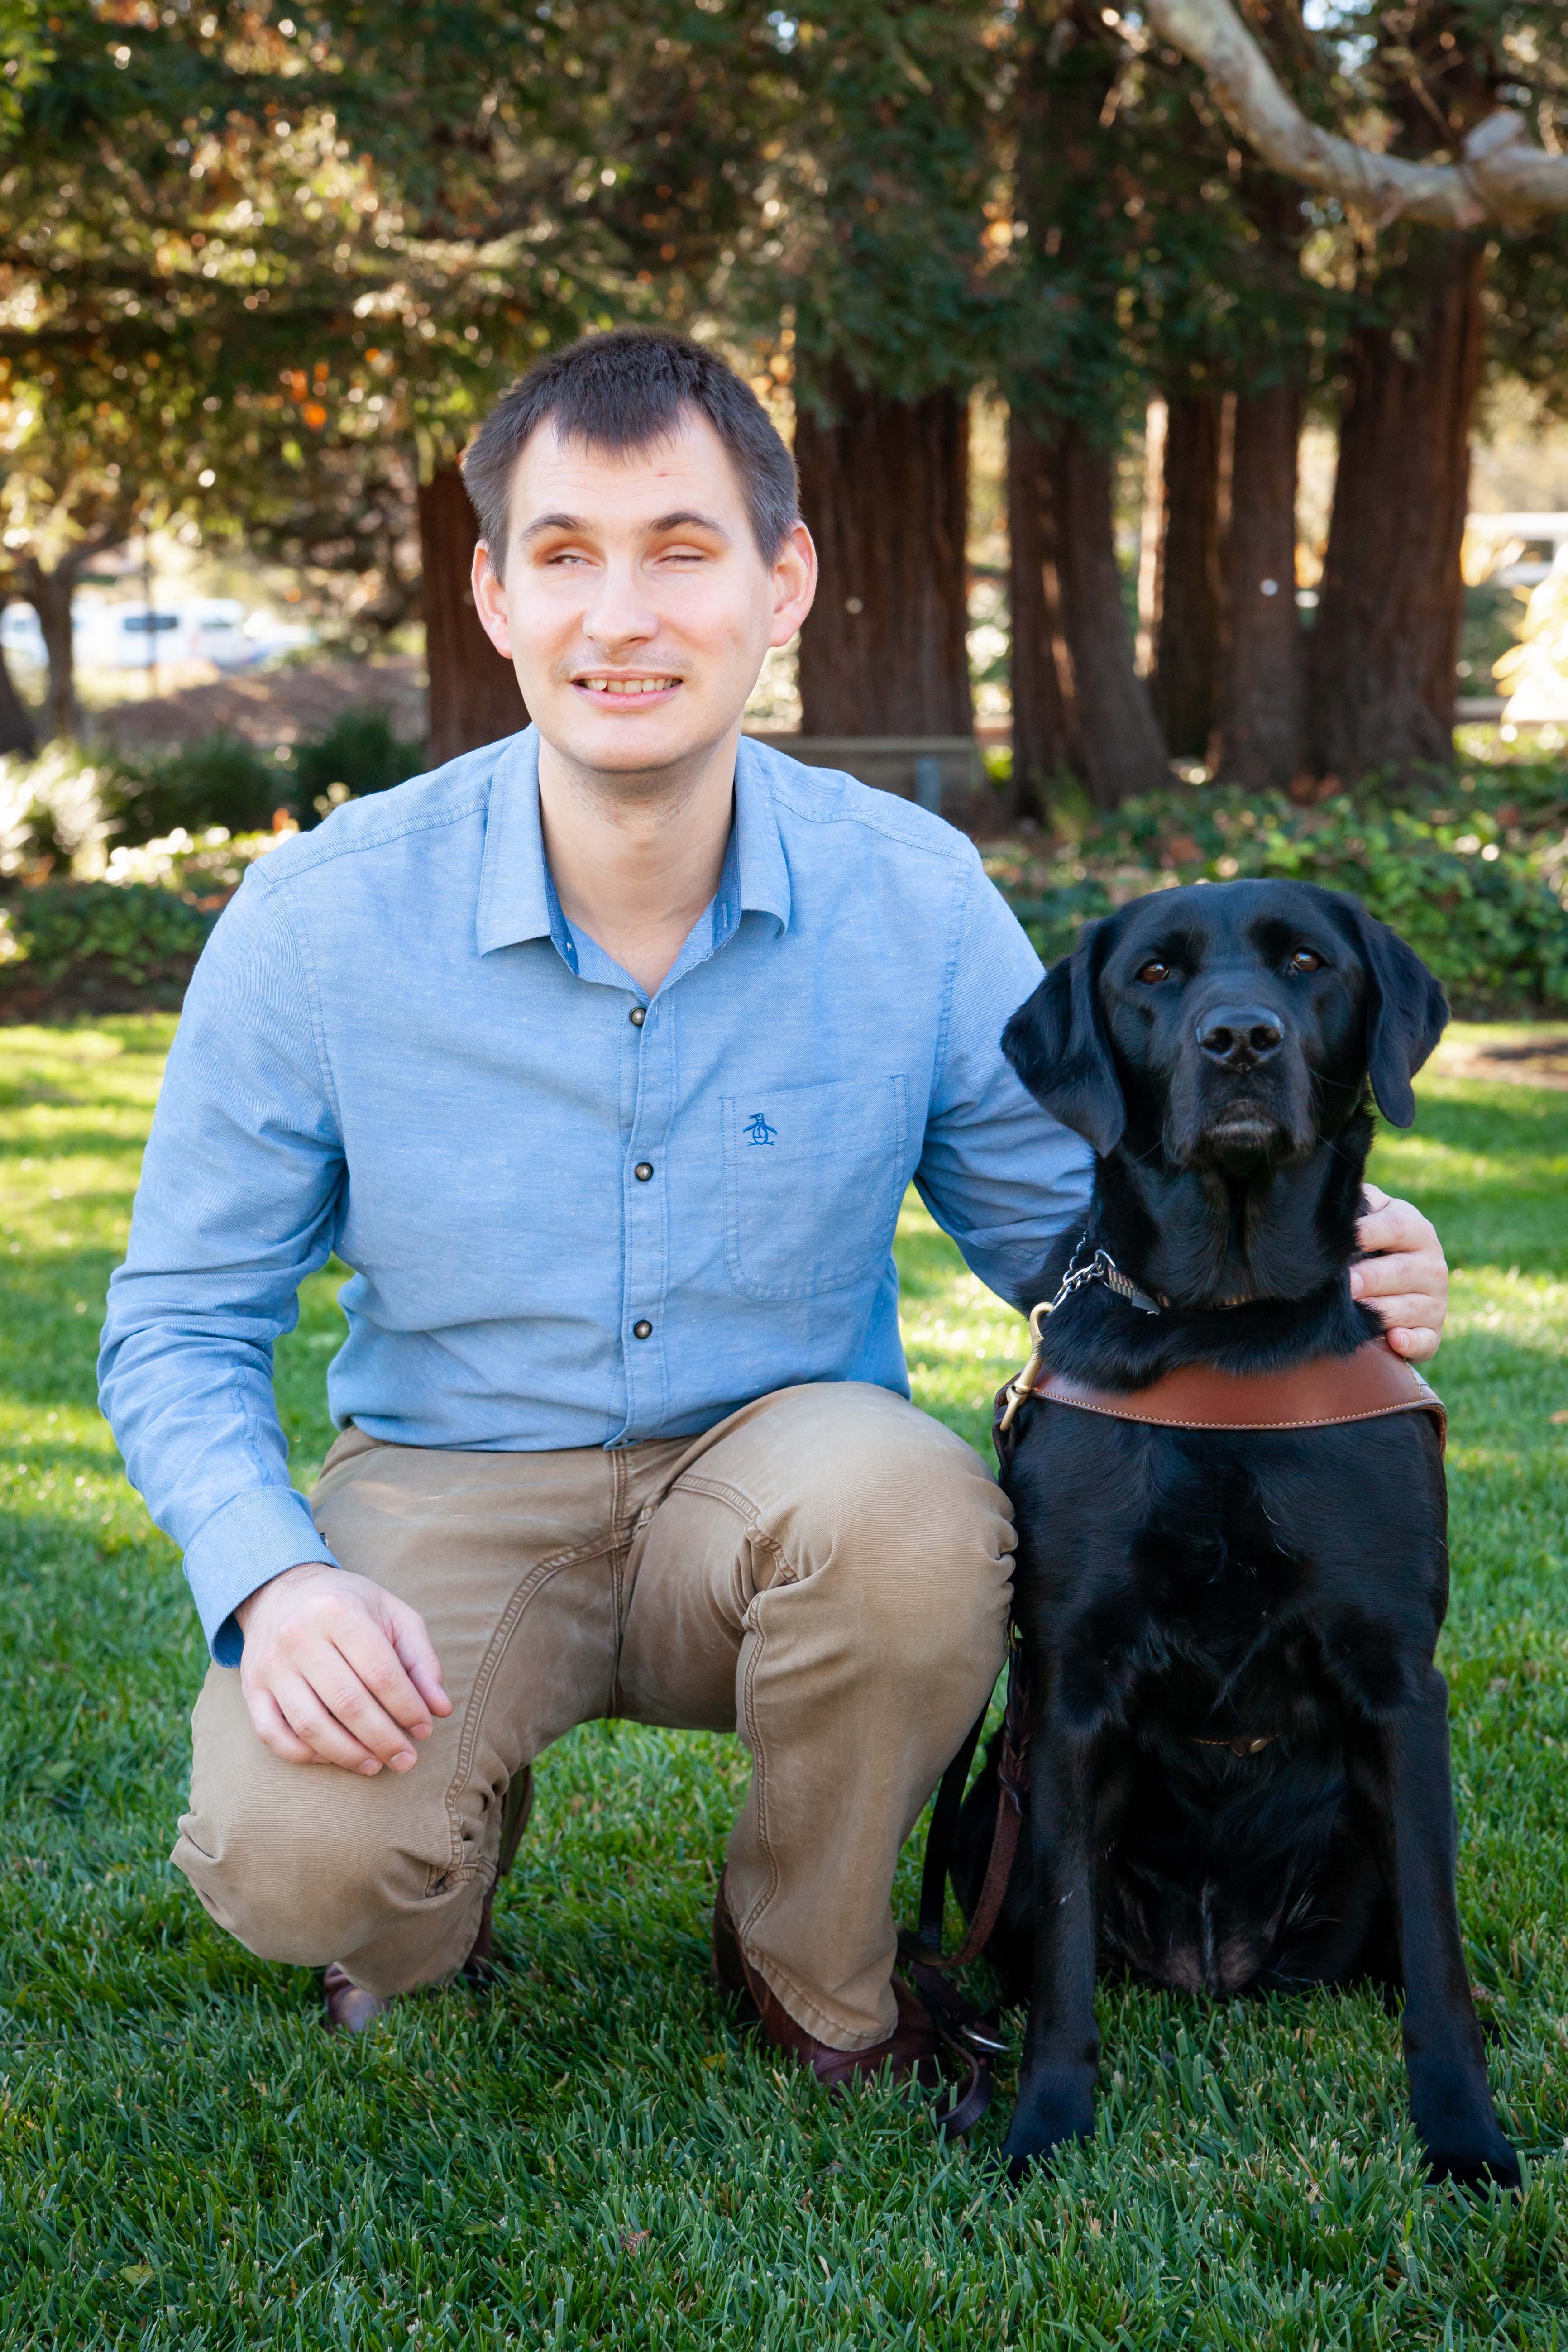 Jake Koch from Guide Dogs for the Blind and his guide dog, Forli. Jake and Forli are standing in a grassy area with trees in the background. Jake is wearing a blue button down shirt and brown pants and is squatting next to Forli, who is a black labrador retriever.